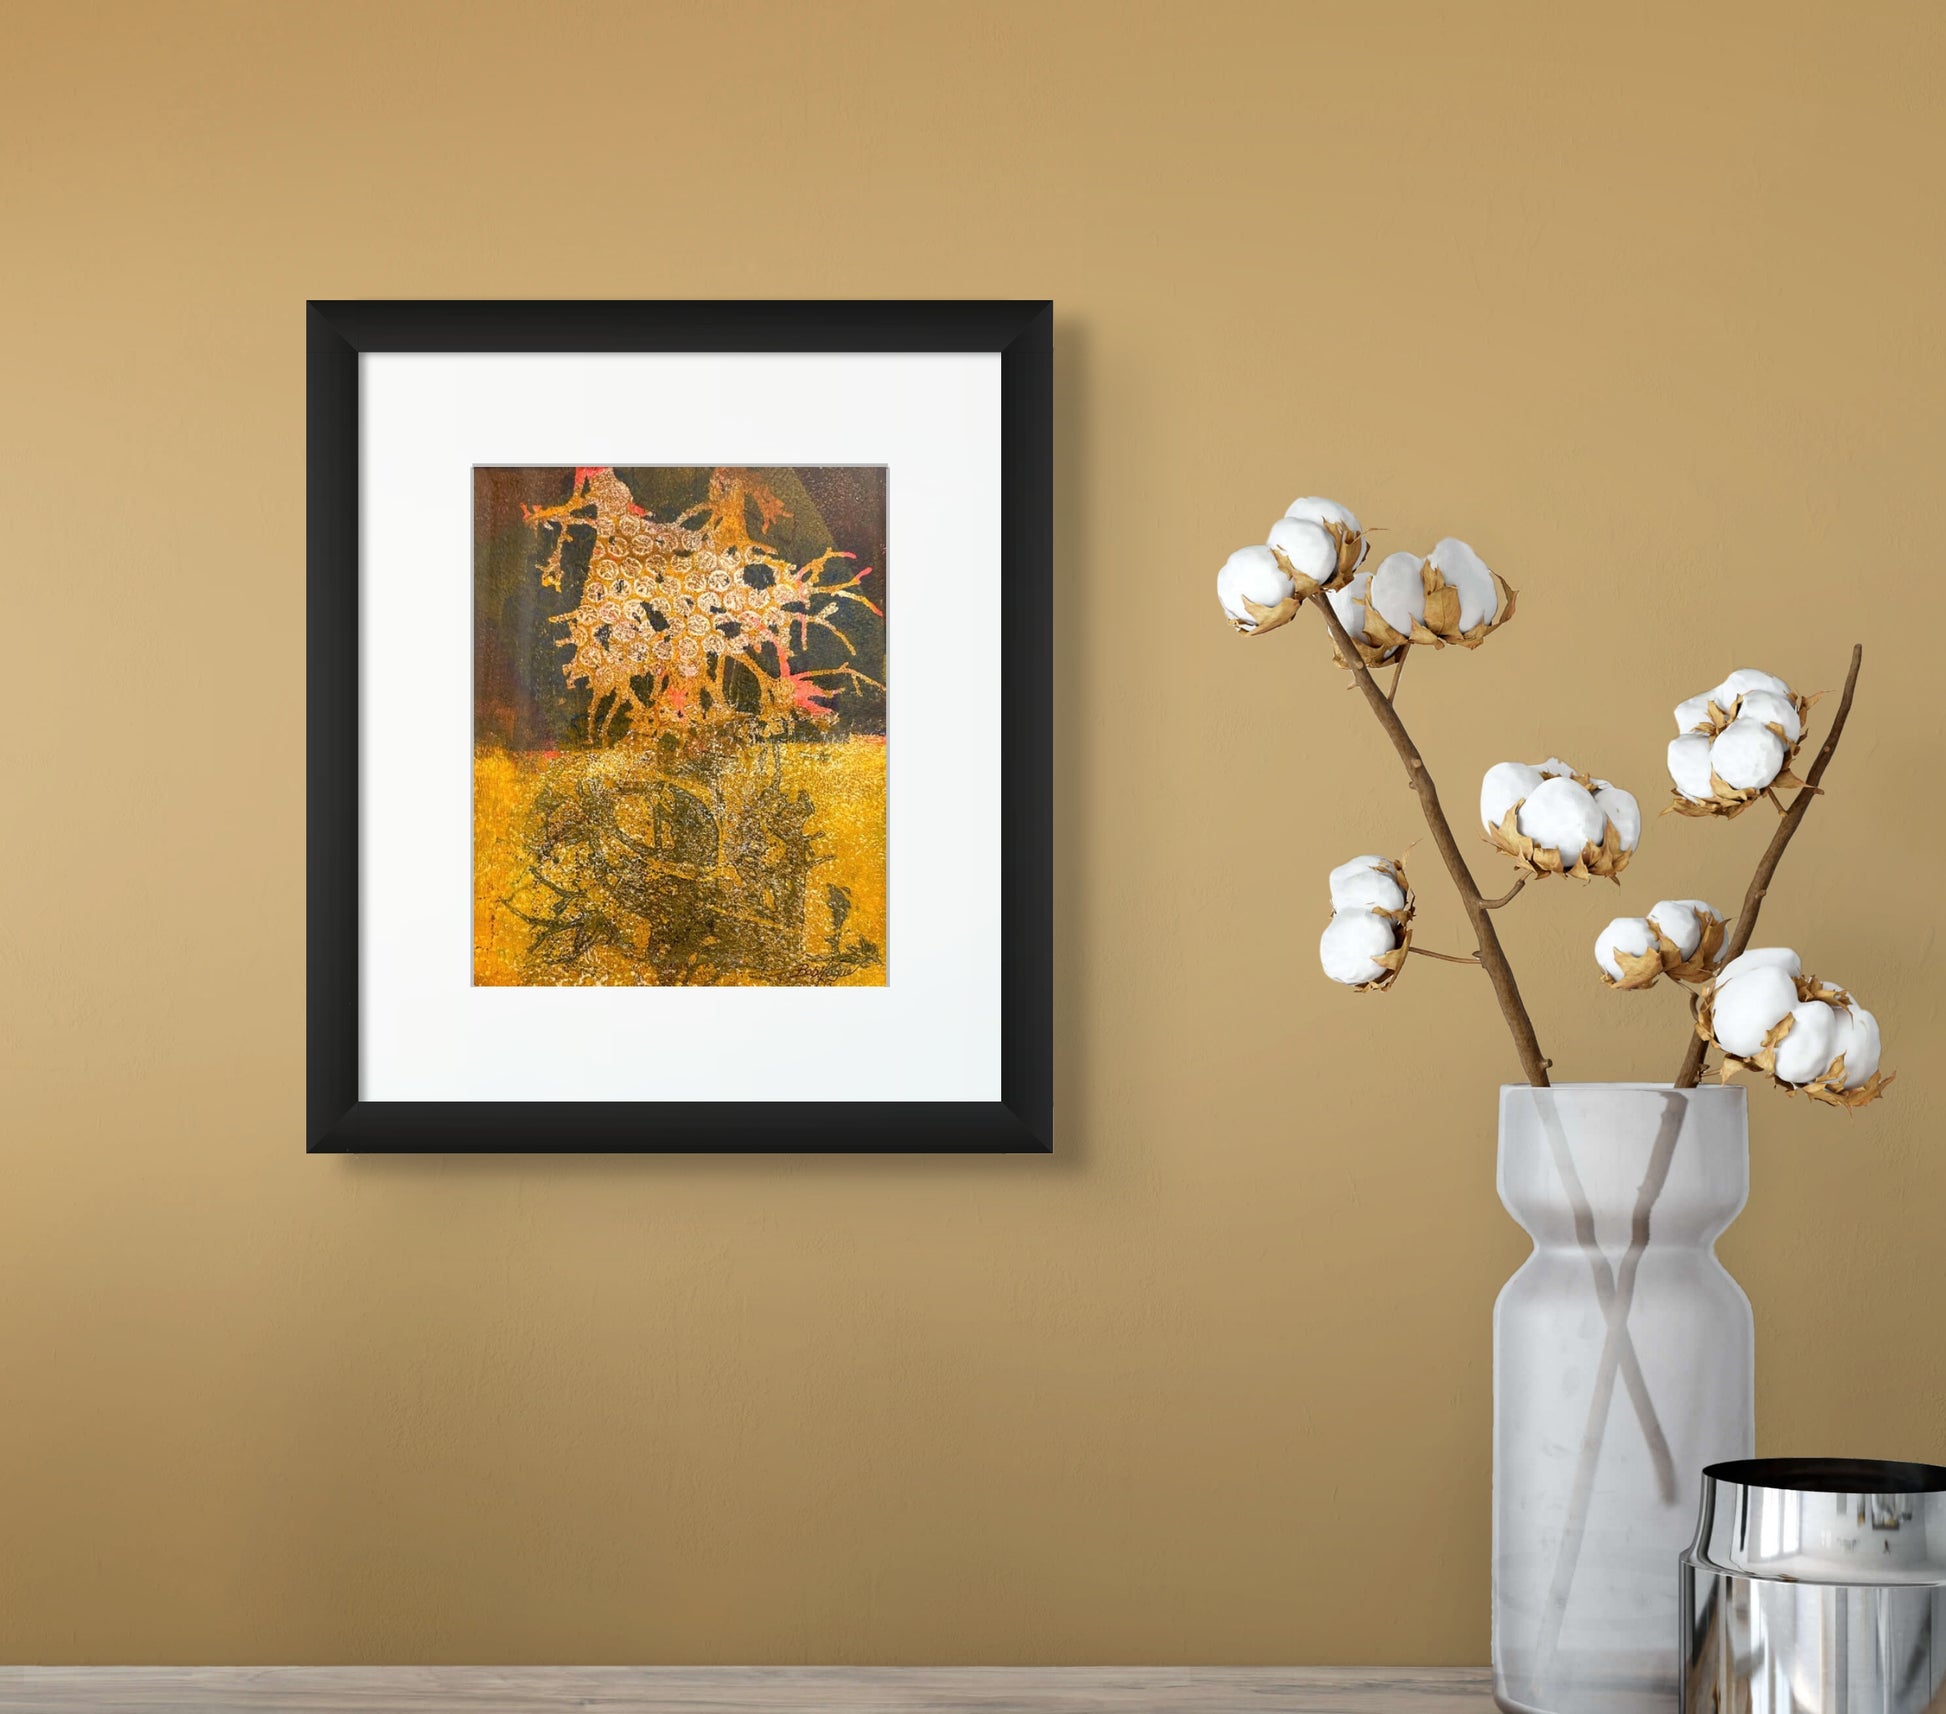 Colorful original abstract image in acrylic using yellow and gold hues; 8"x10" image; artist Bob Hogue; shown in situ on wall